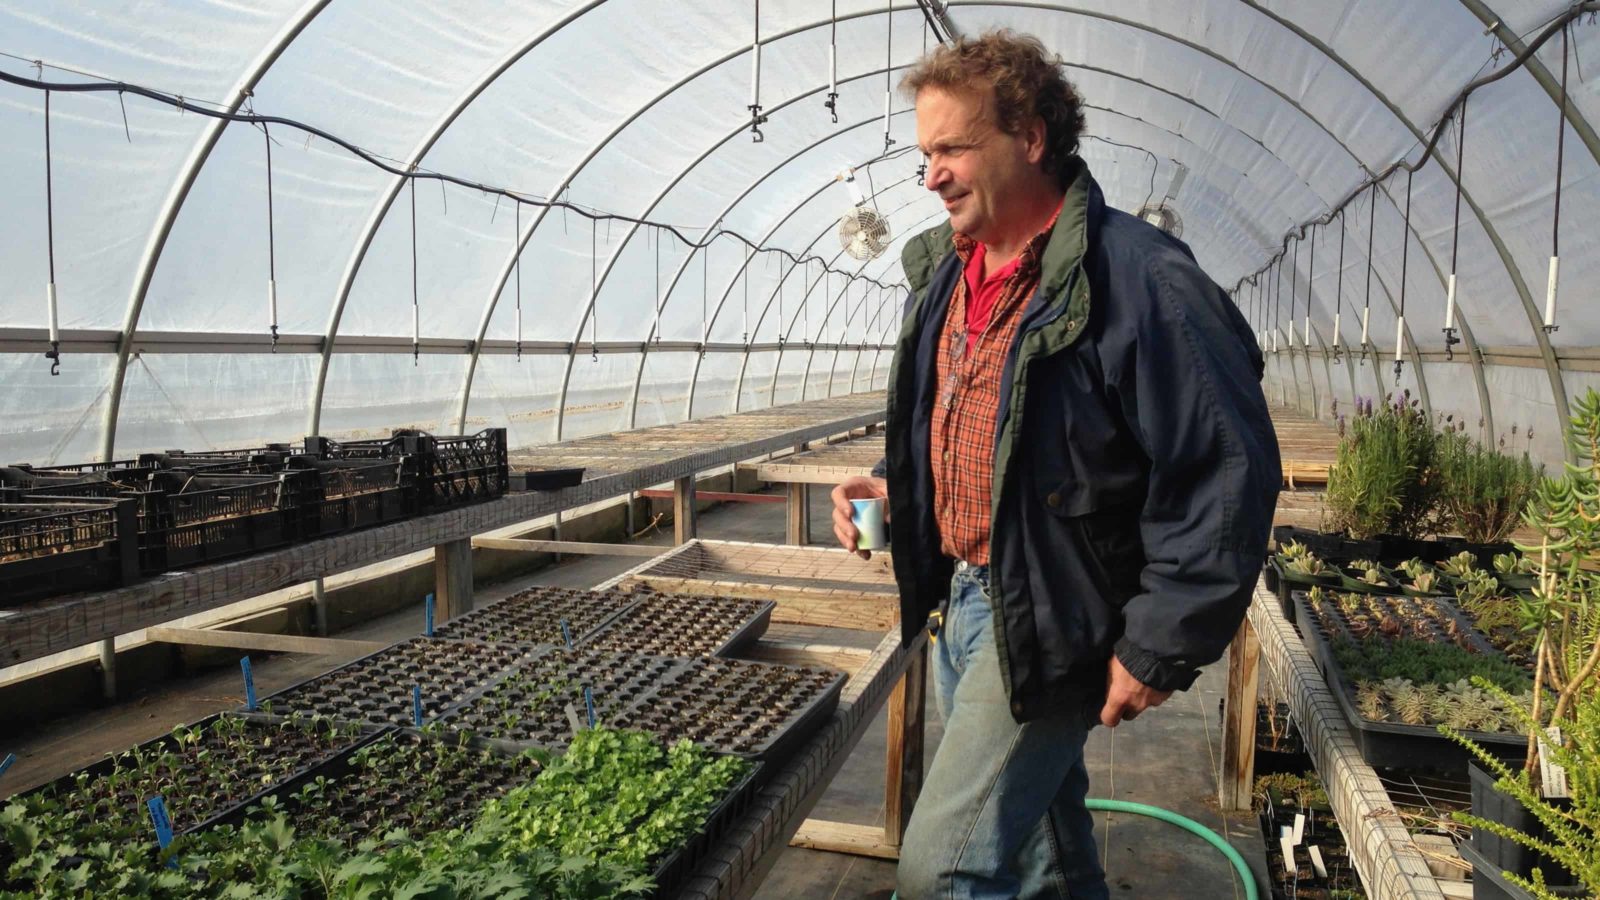 Chatham Berry Farm grows fresh produce even in winter.